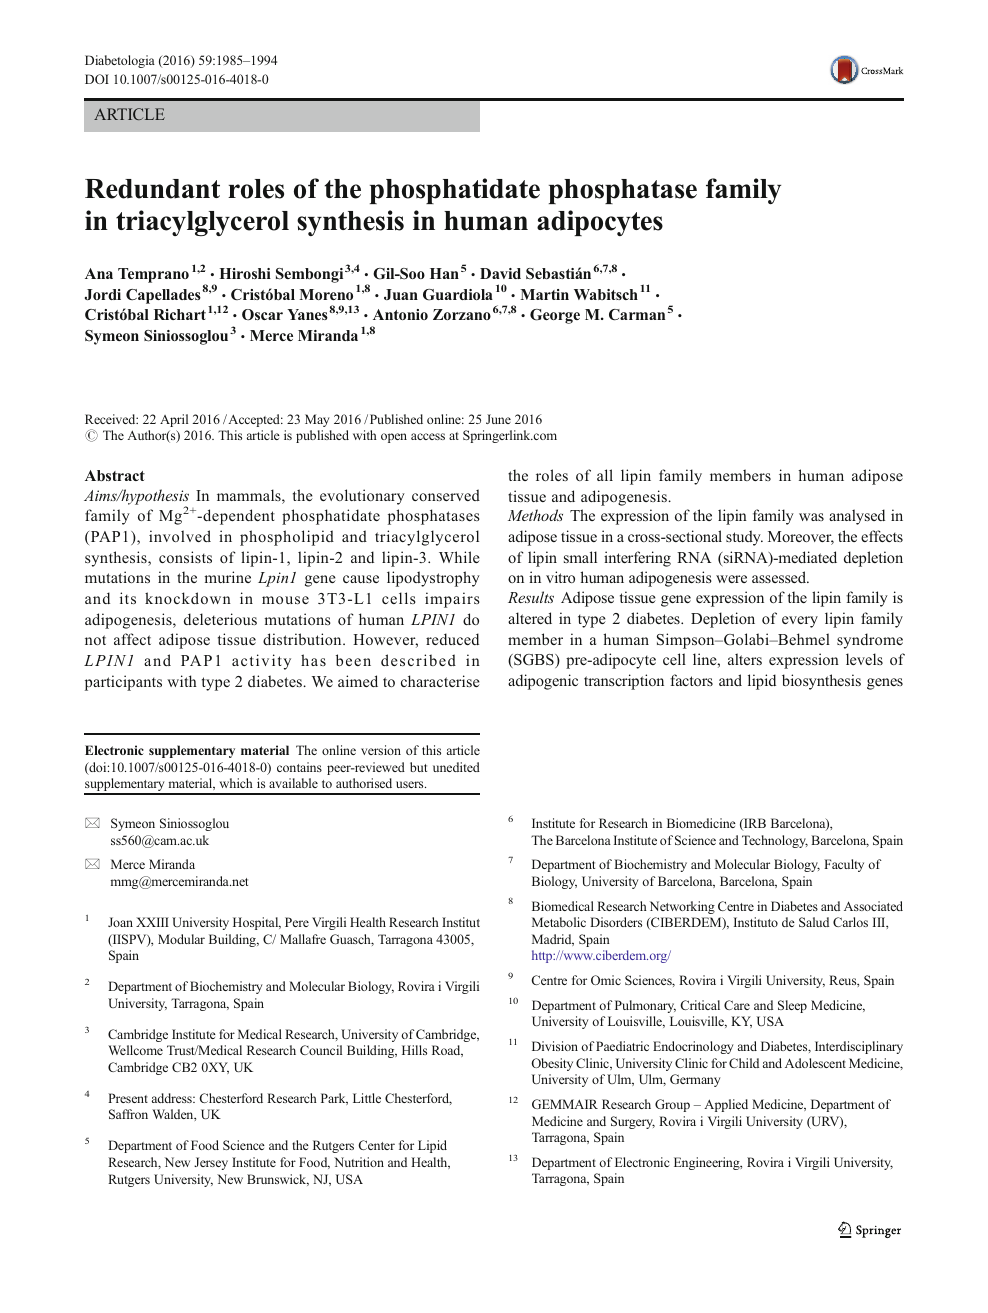 Redundant Roles Of The Phosphatidate Phosphatase Family In Triacylglycerol Synthesis In Human Adipocytes Topic Of Research Paper In Biological Sciences Download Scholarly Article Pdf And Read For Free On Cyberleninka Open